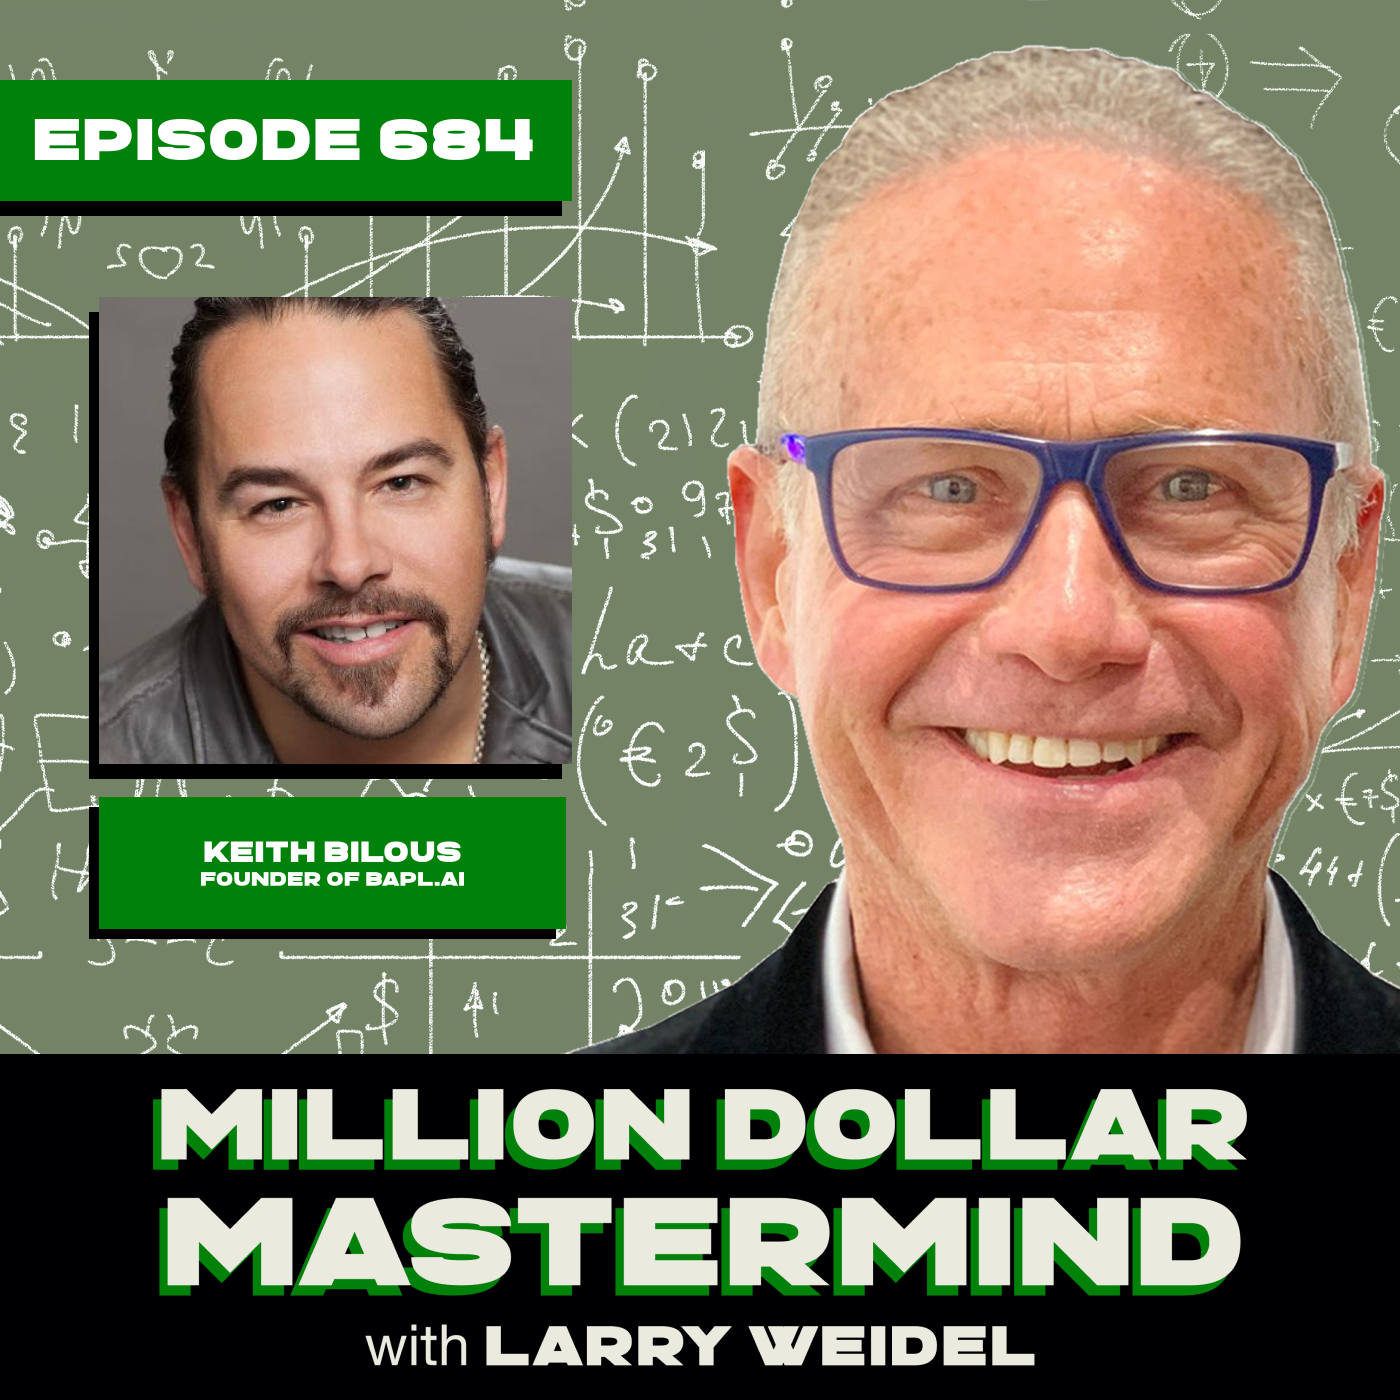 Episode #684 - 24/7 Work With Major Brands with Keith Bilous, The Original Growth Hacker